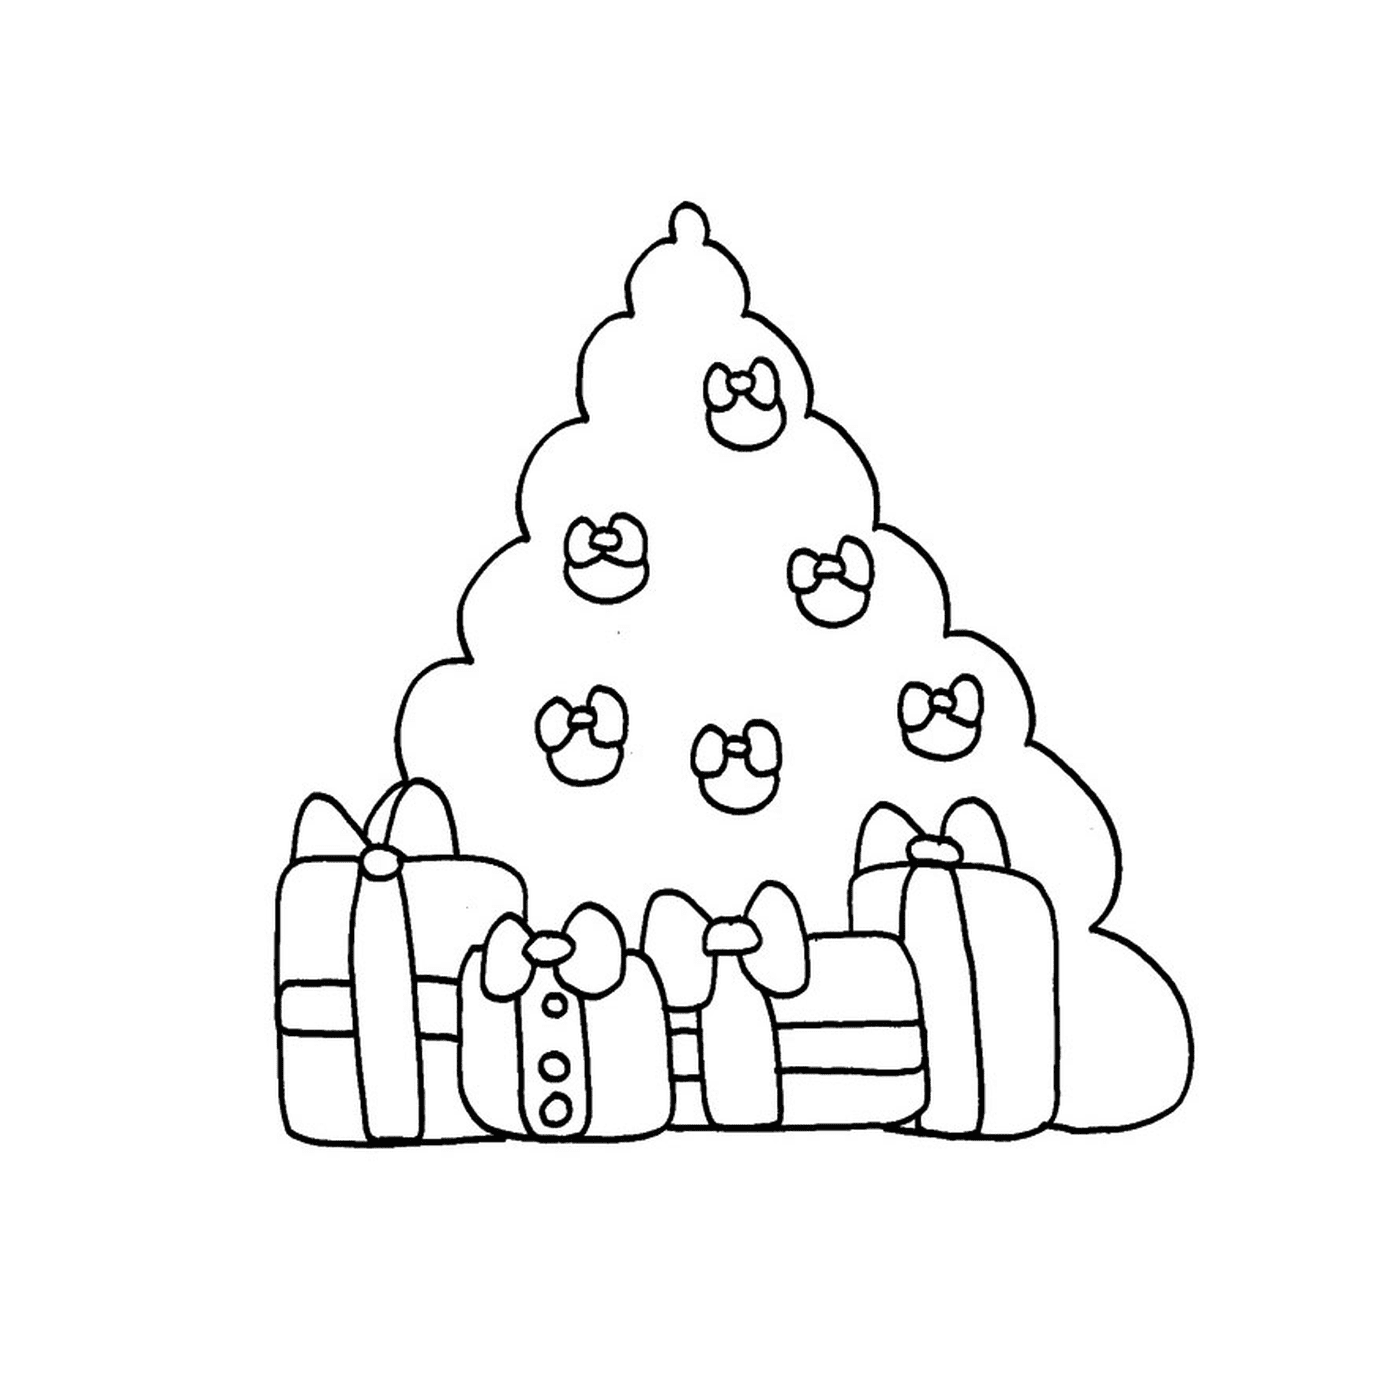  A Christmas tree with presents on it 